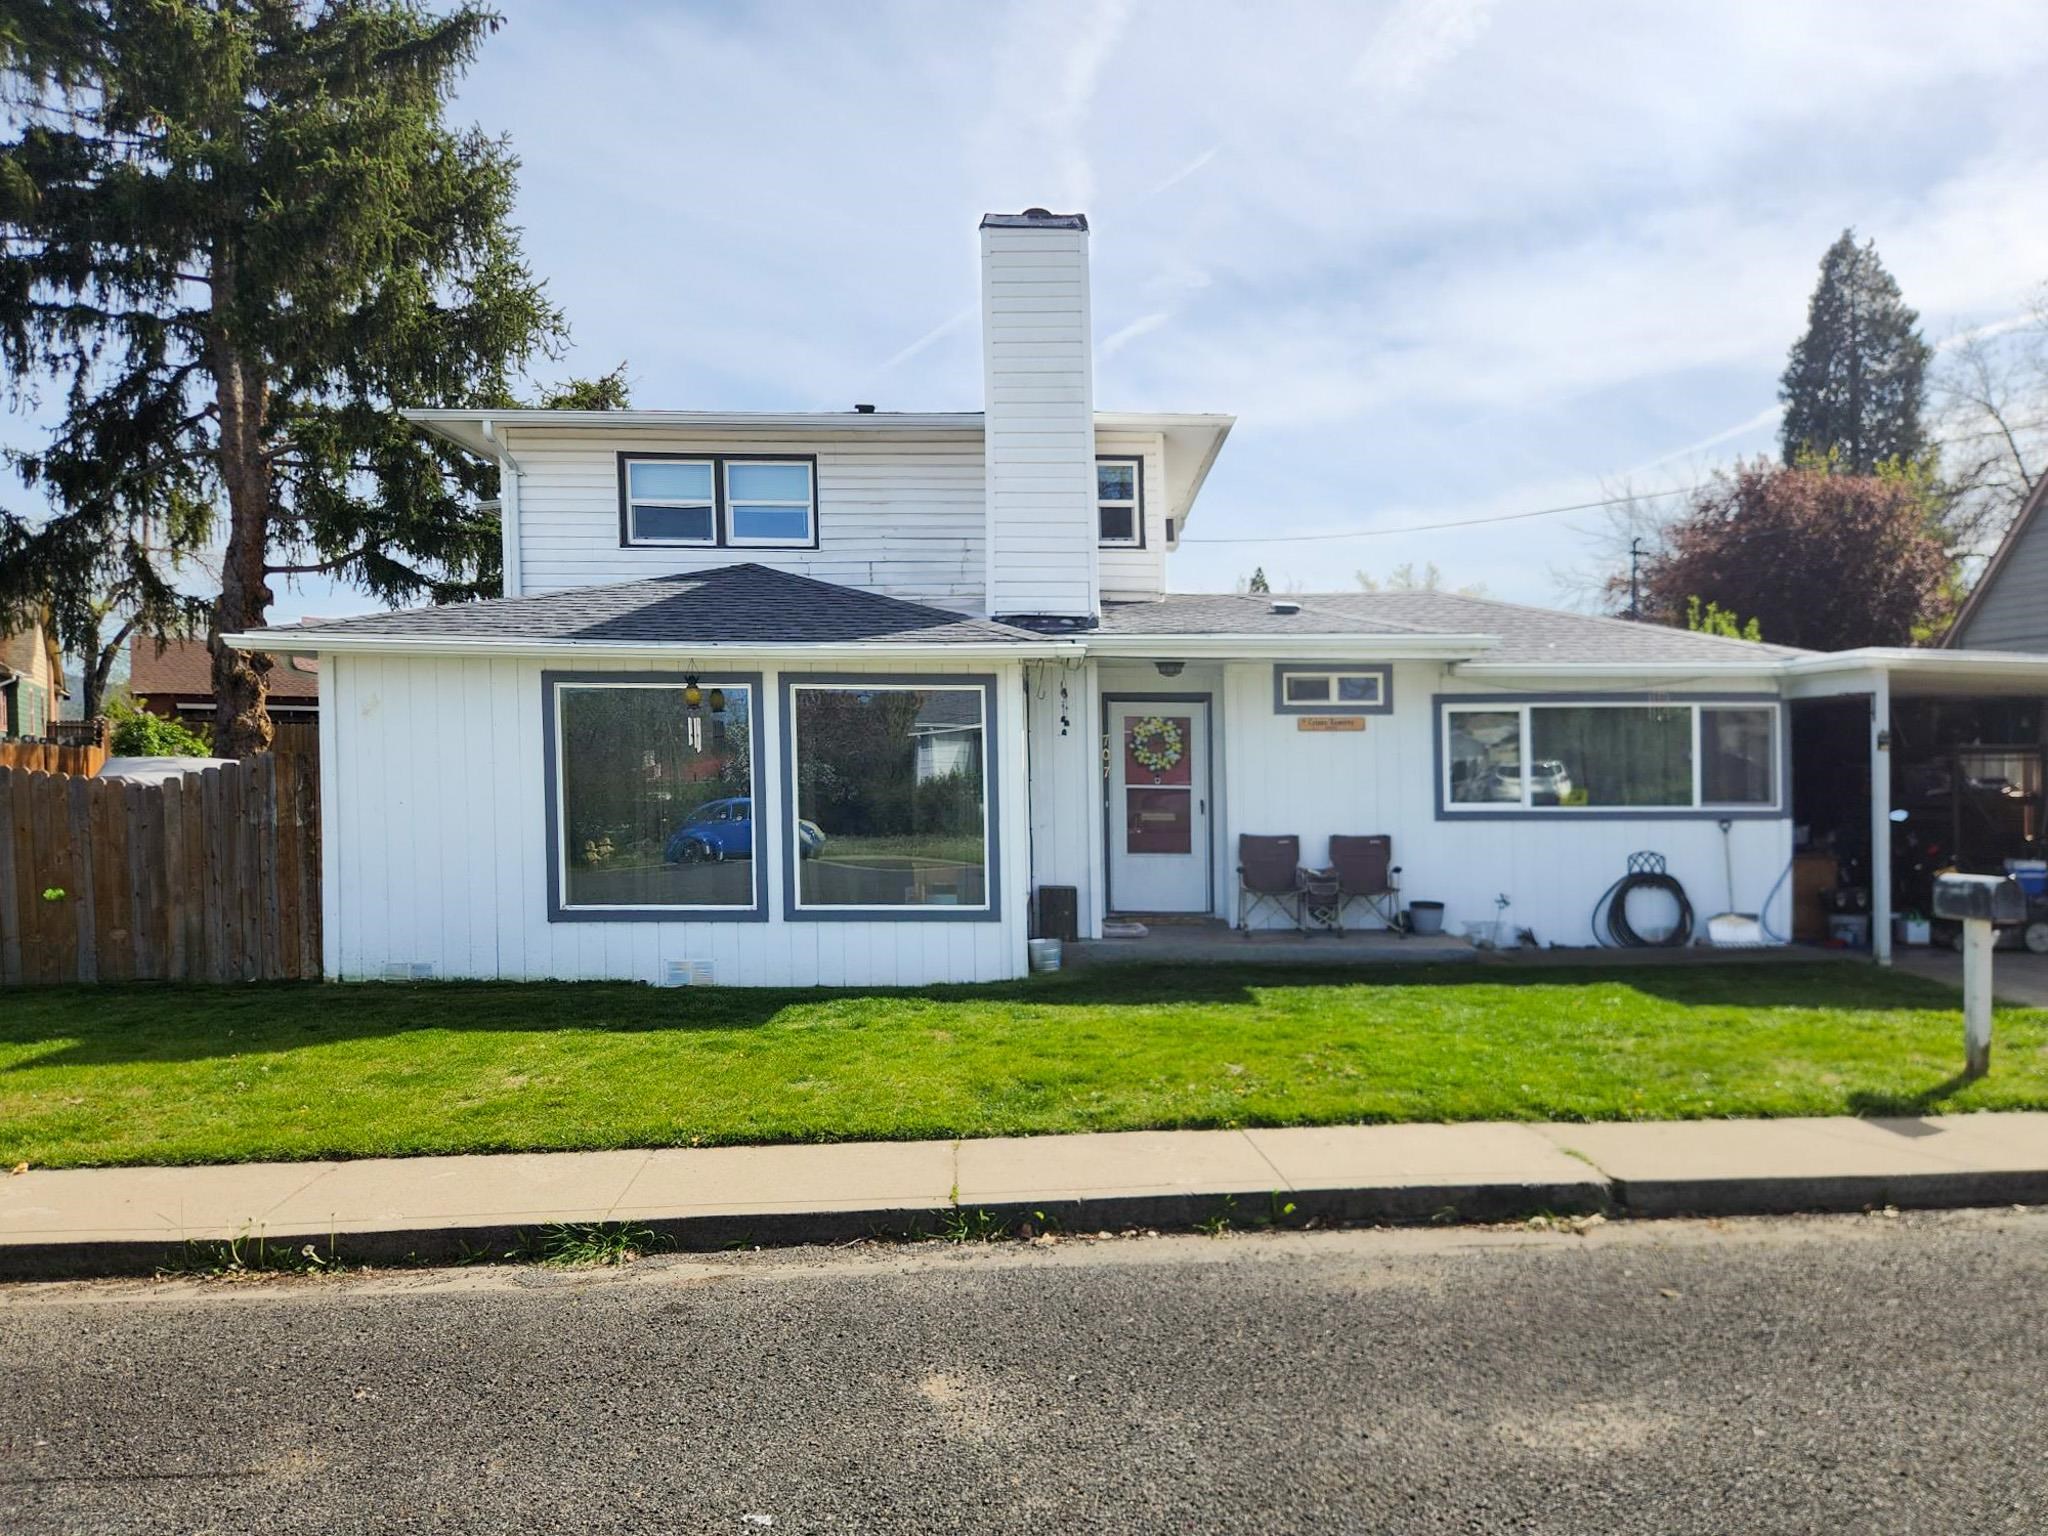 2 Story, 4 Bedroom, 2 Bathroom home close to schools and downtown Yreka. Lots of charm and utility. Features such as: 2 Mid sized workshops/storage rooms, carport, fenced back yard, paved driveway, and great neighborhood are a foundation for making this one your dream home.